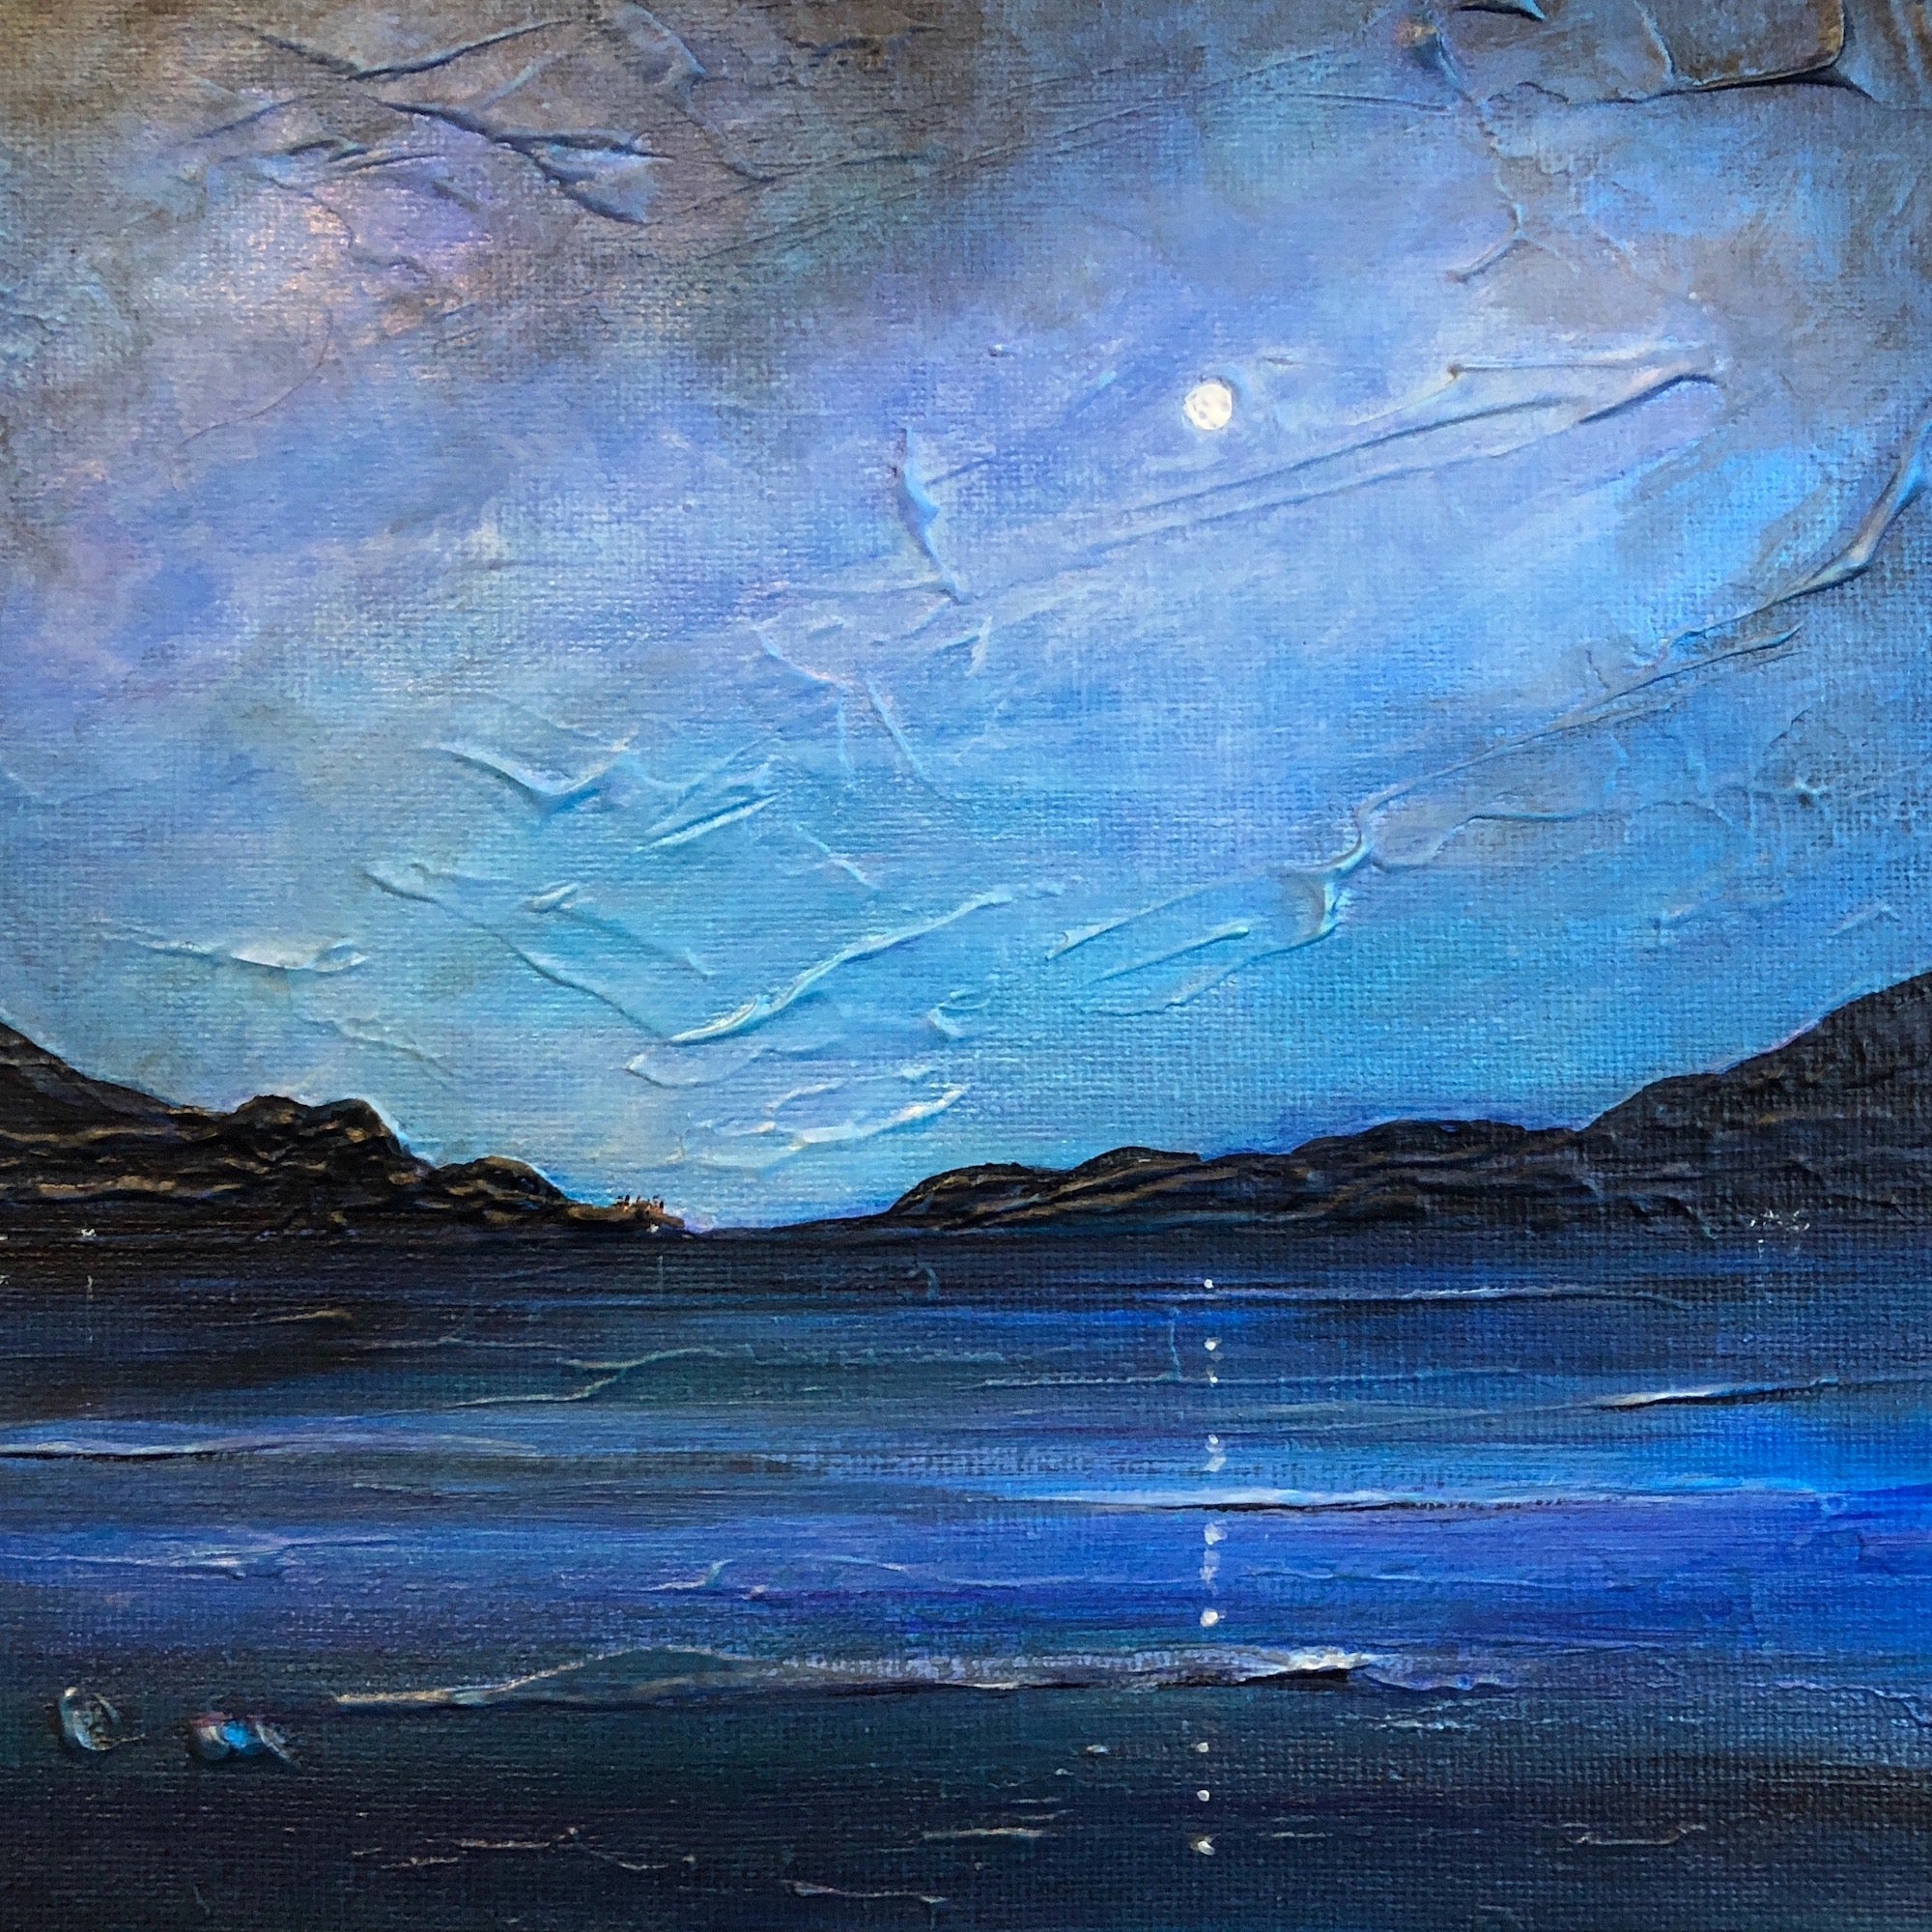 Loch Ness Moonlight | Scotland In Your Pocket Framed Prints-Scotland In Your Pocket Framed Prints-Scottish Lochs & Mountains Art Gallery-Paintings, Prints, Homeware, Art Gifts From Scotland By Scottish Artist Kevin Hunter